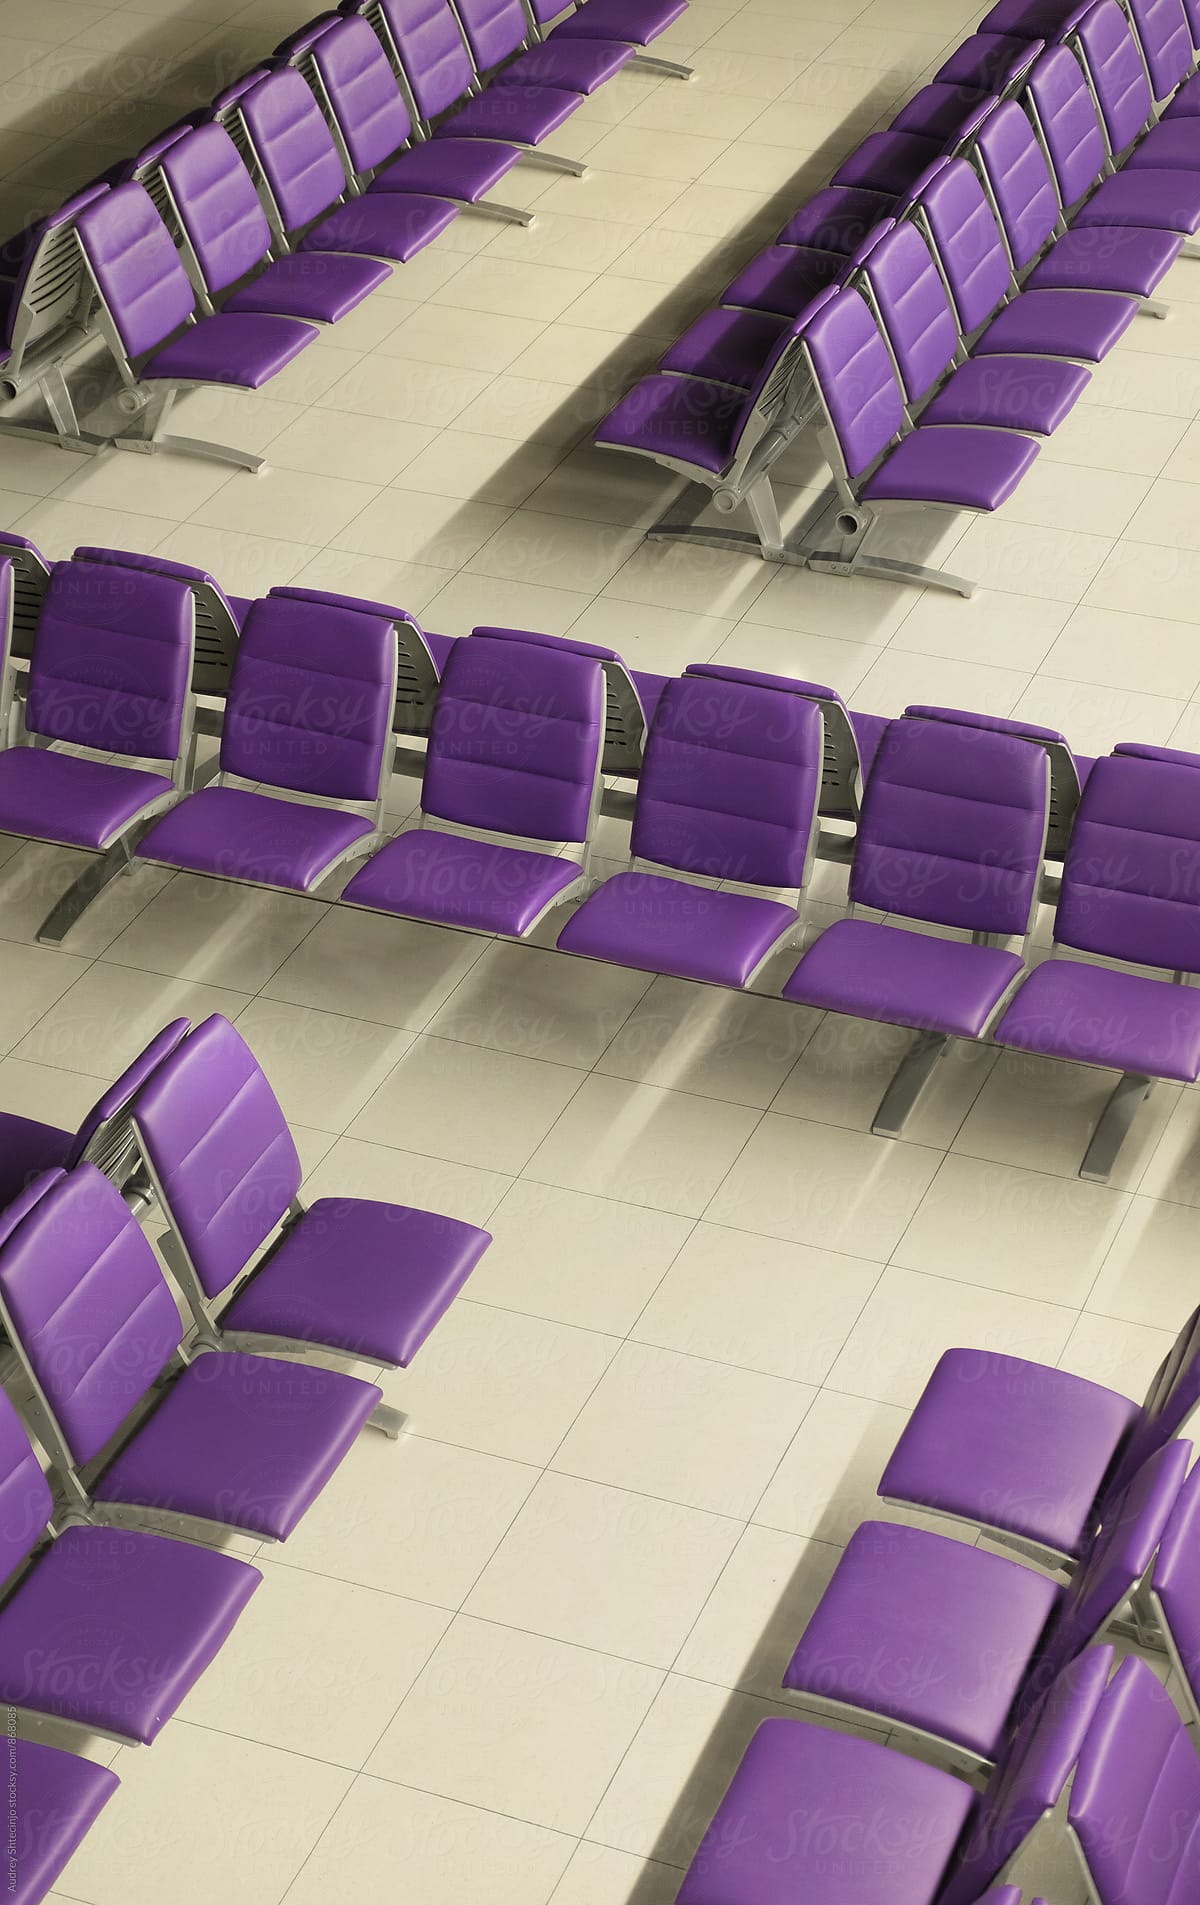 Purple chairs in row in waiting room.